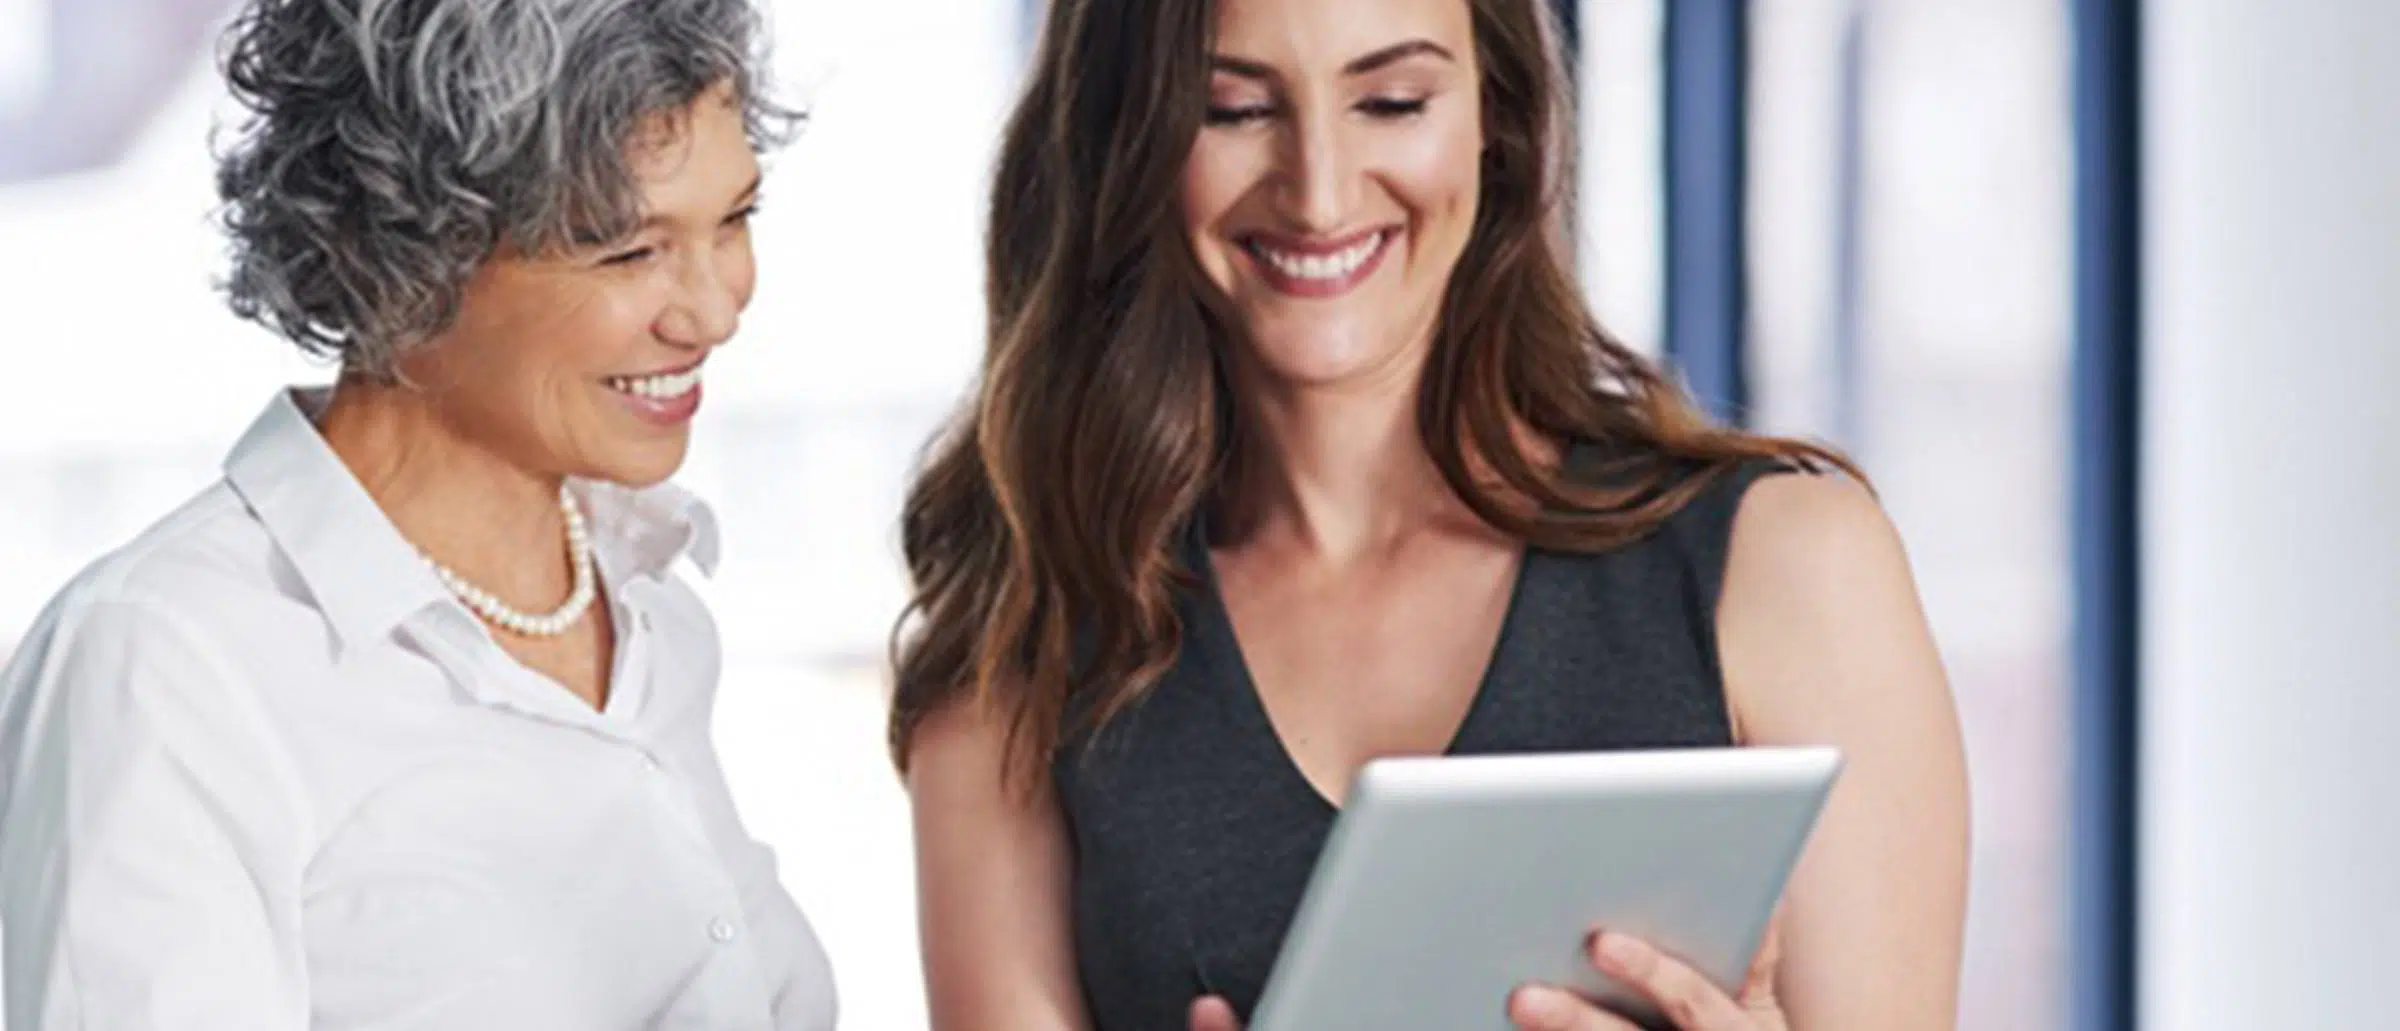 An older businesswoman and a younger businesswoman looking at a tablet device and smiling